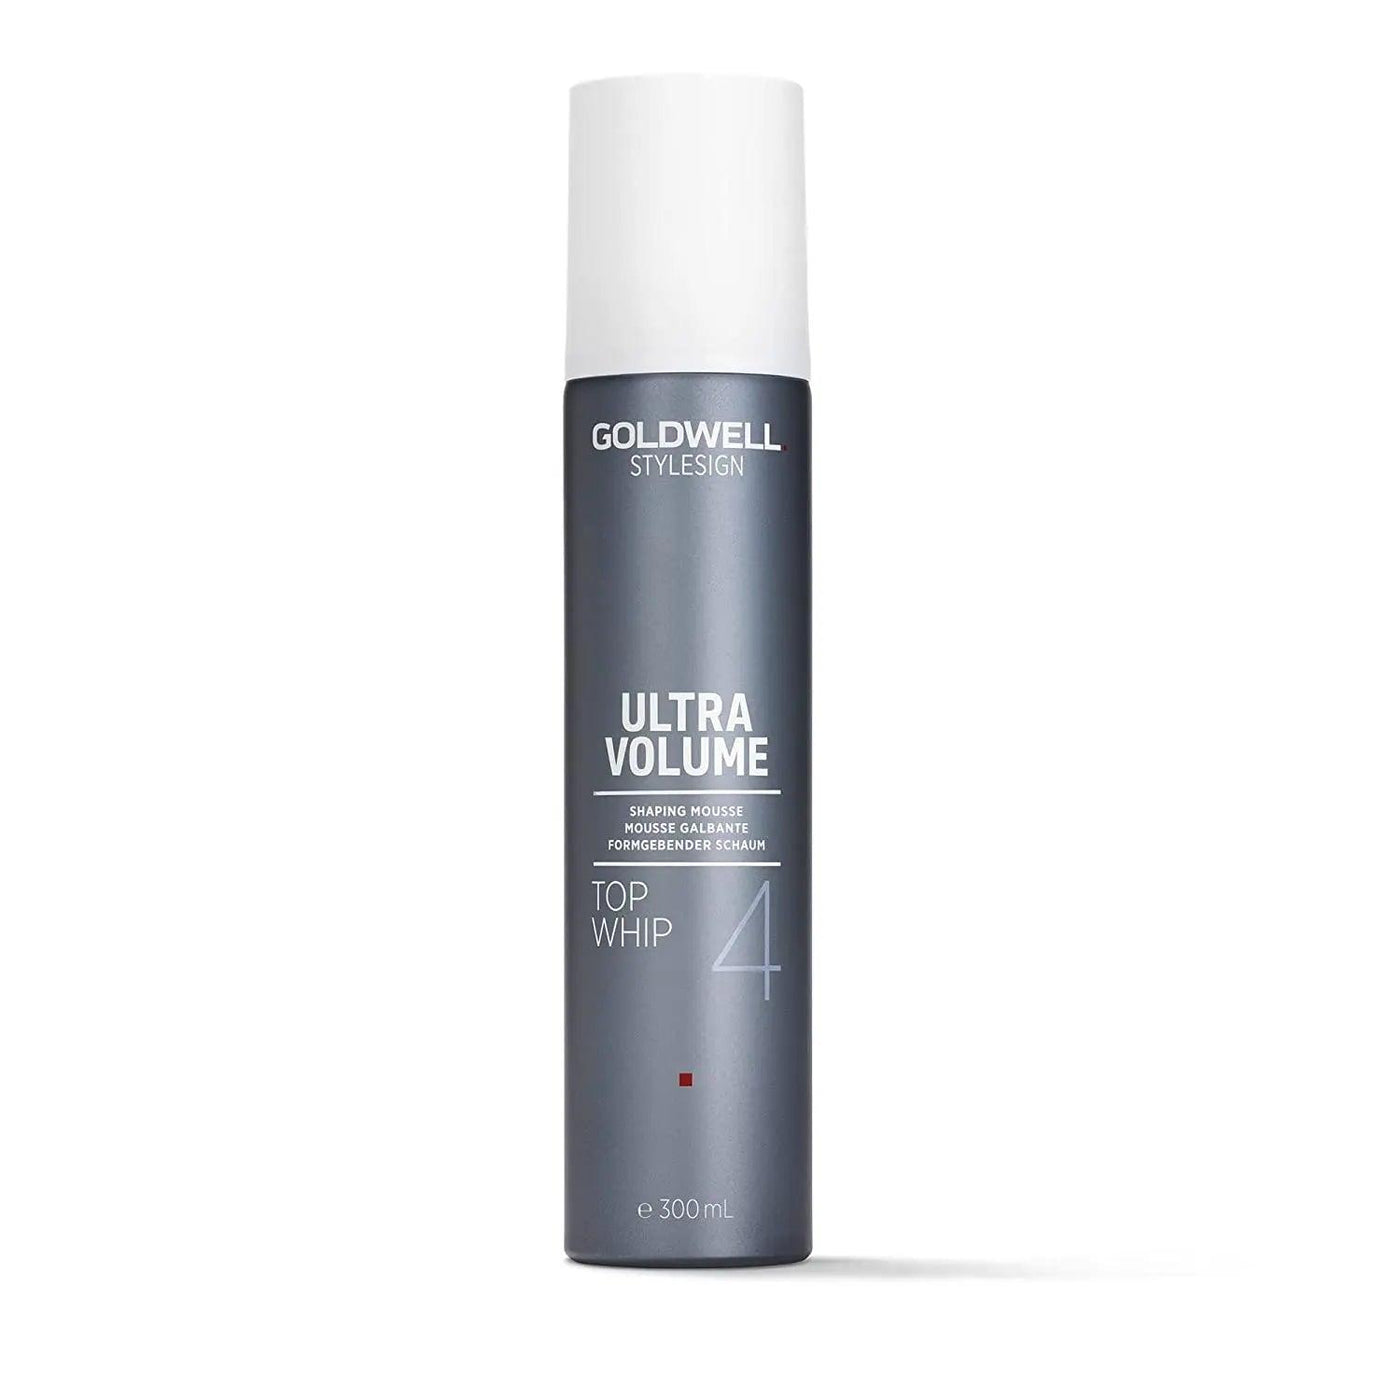 Goldwell Stylesign Ultra Volume Top Whip Shaping Mousse Goldwell Boutique Deauville